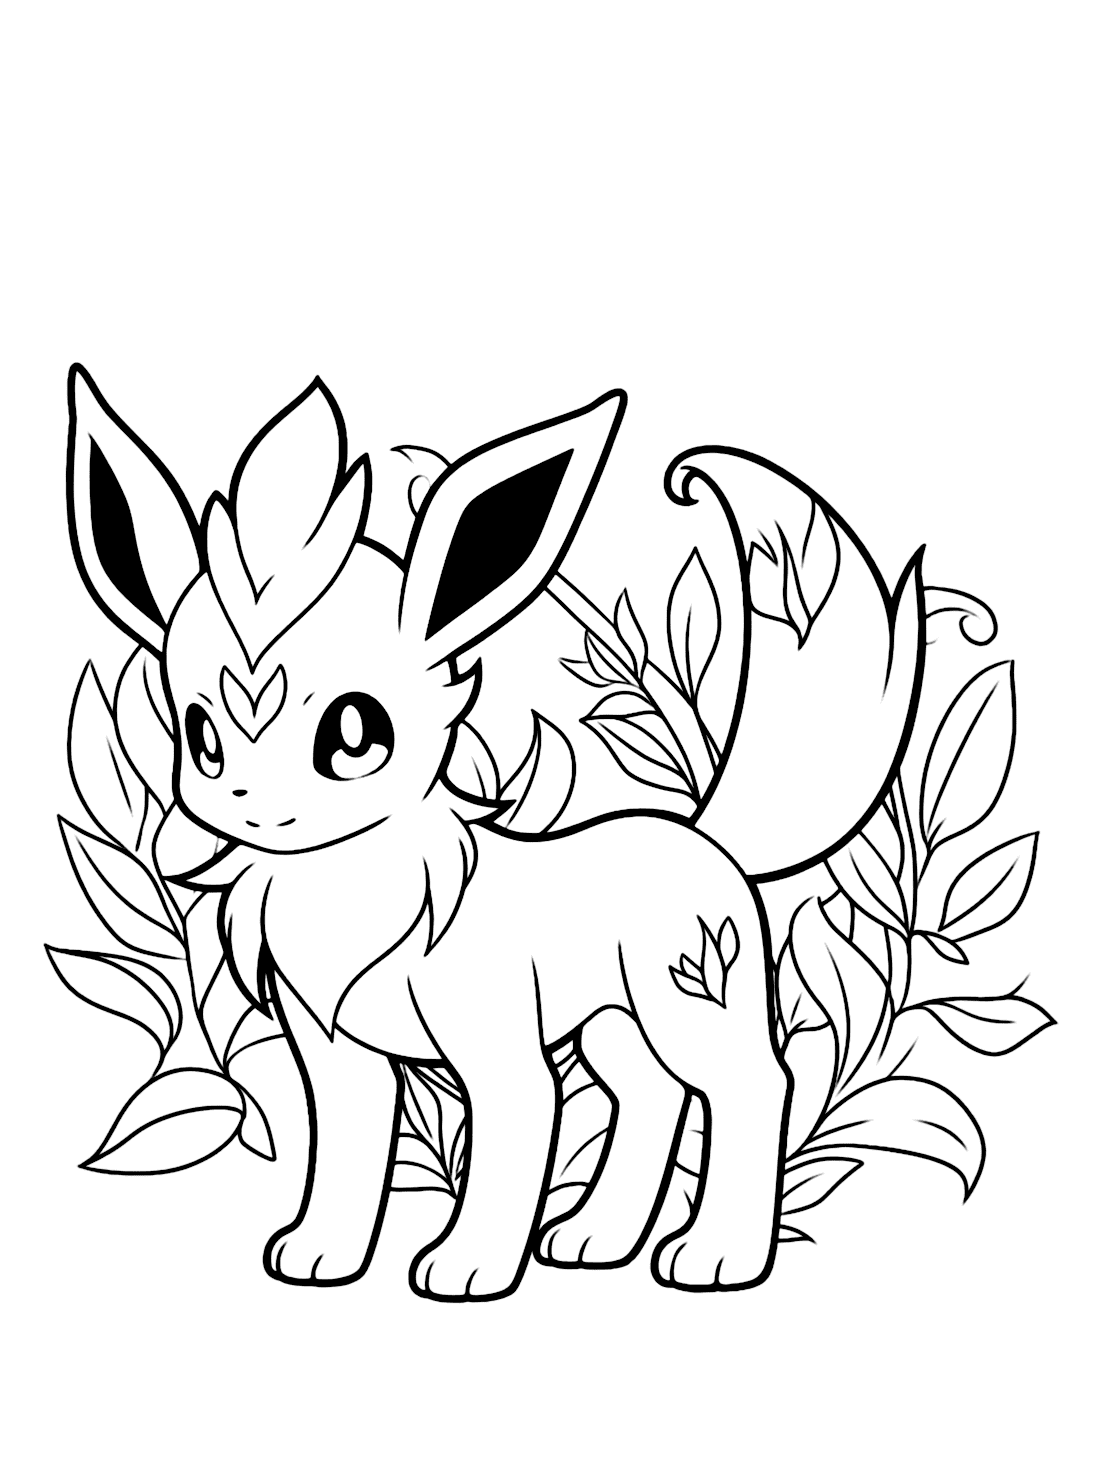 Pokemon Leafeon Drawing Coloring Page